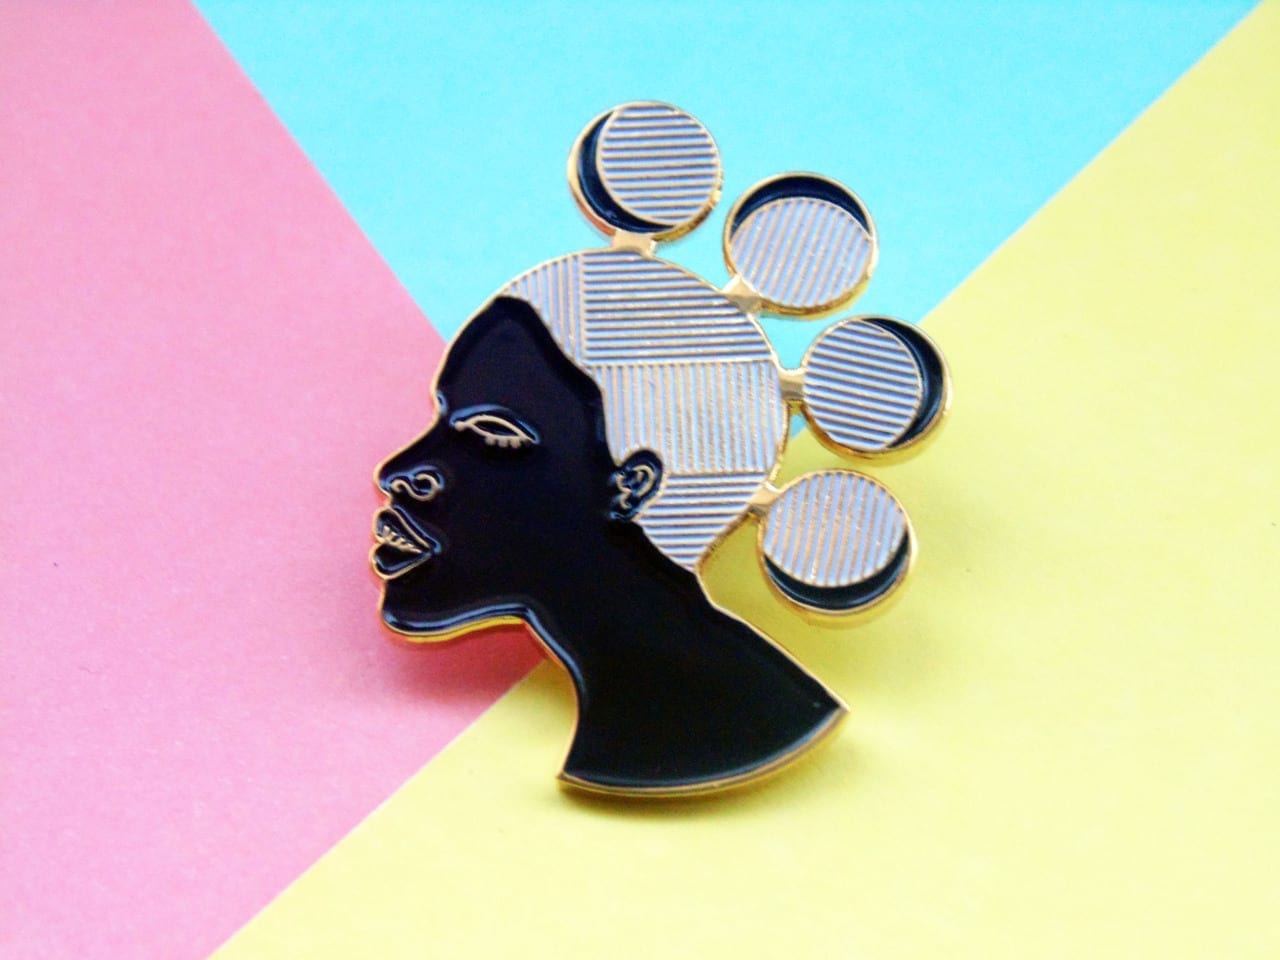 black owned pin and patch businesses